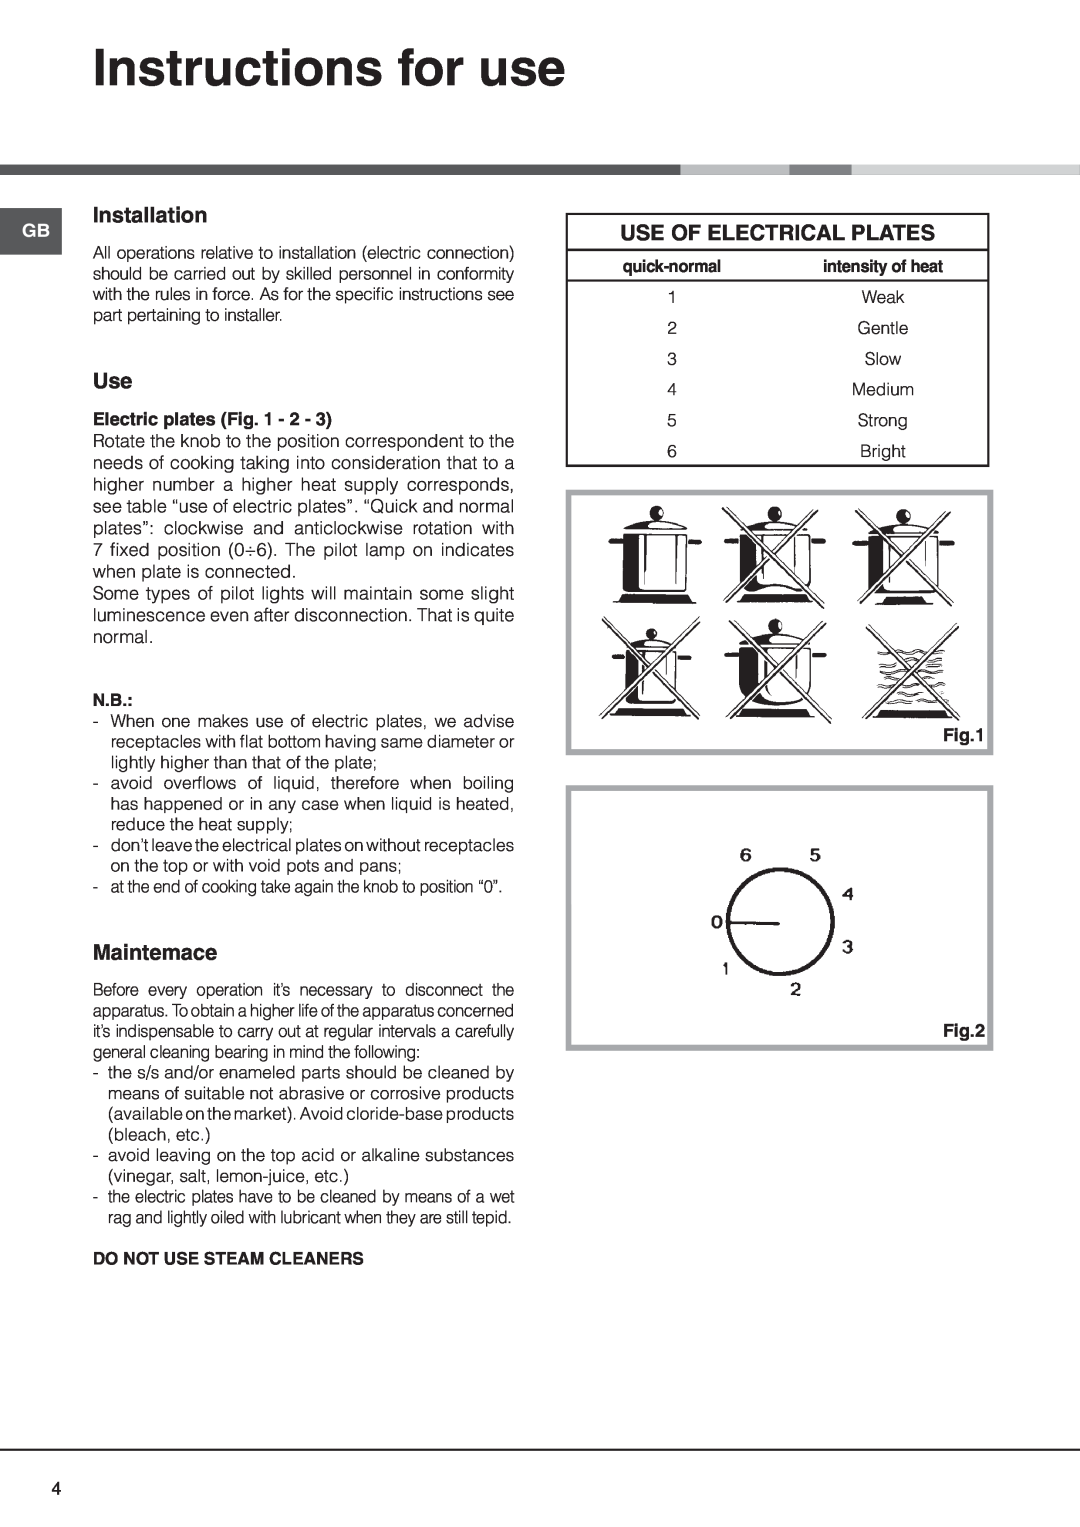 Hotpoint E320SIX manual Instructions for use, Installation, Maintemace, Use Of Electrical Plates, Electric plates Fig 